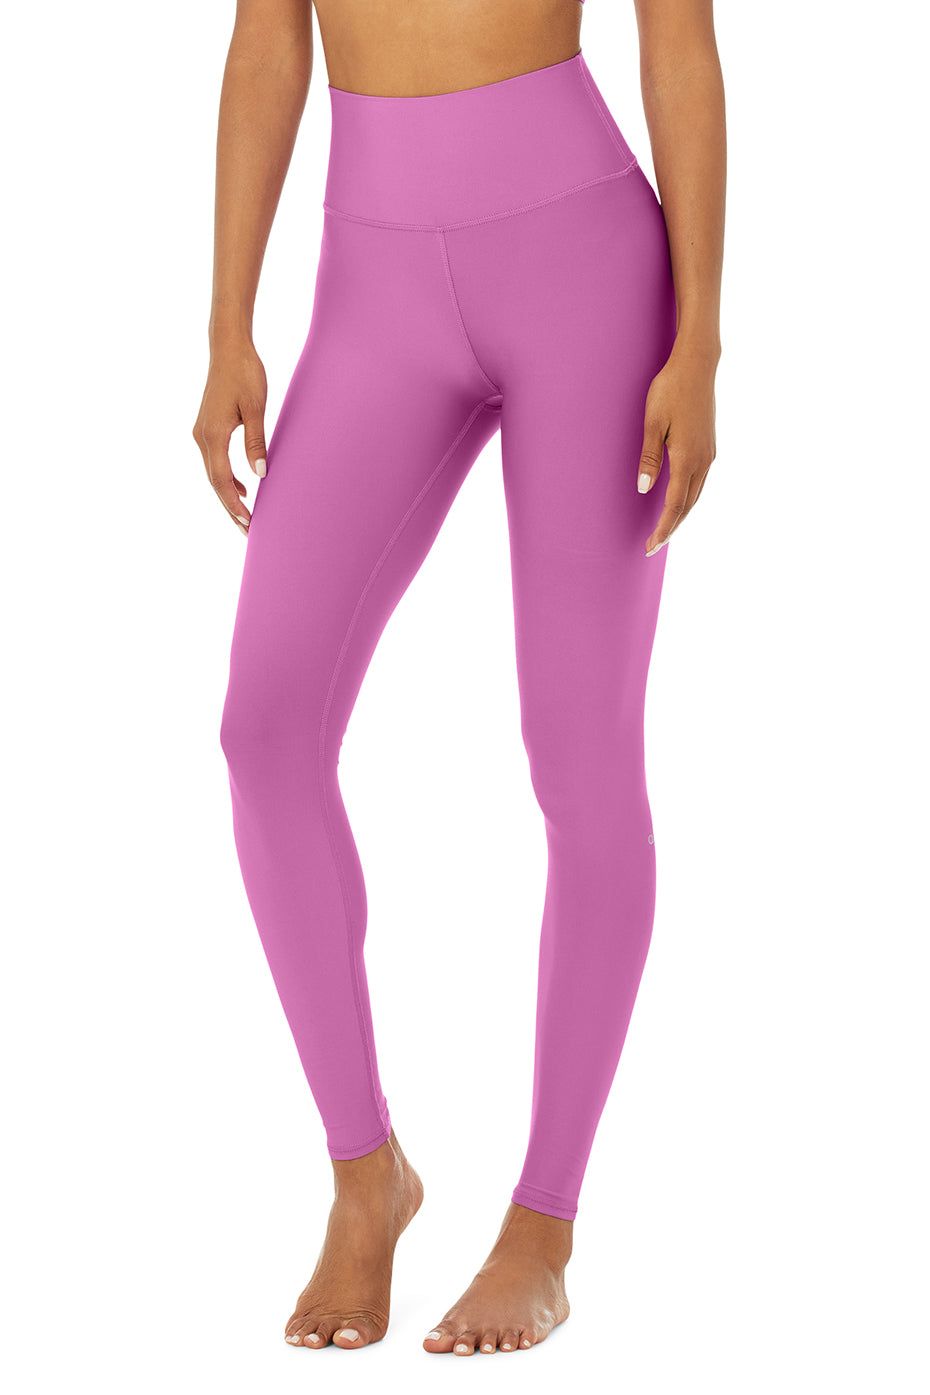 Alo Yoga Idol Legging NWT Rosewater Glossy Size S M L Sold Out Style!